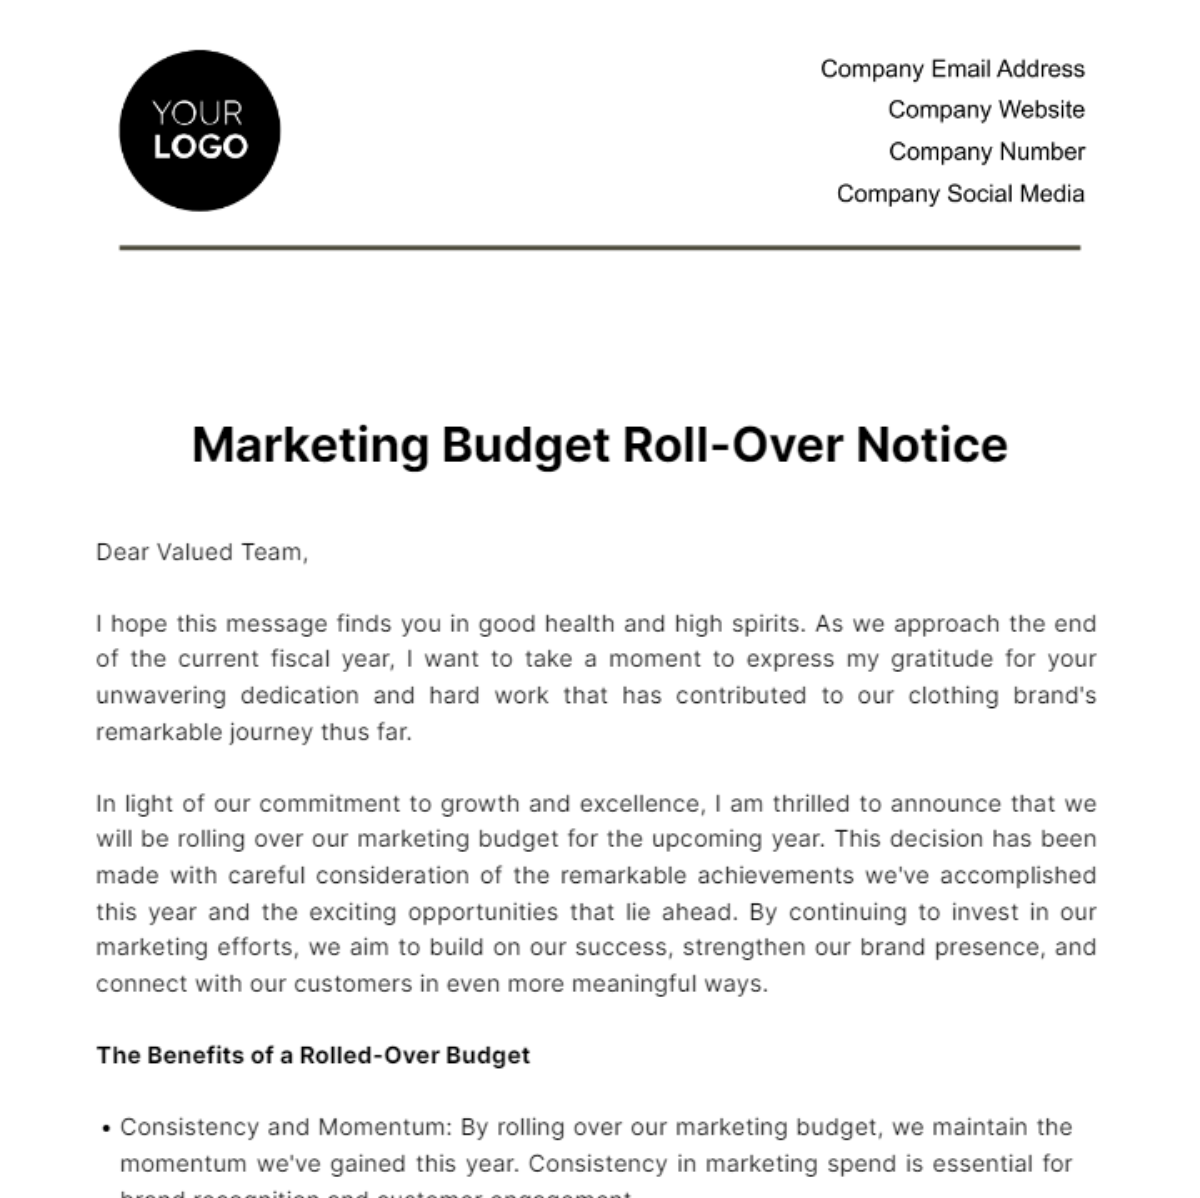 Marketing Budget Roll-over Notice Template